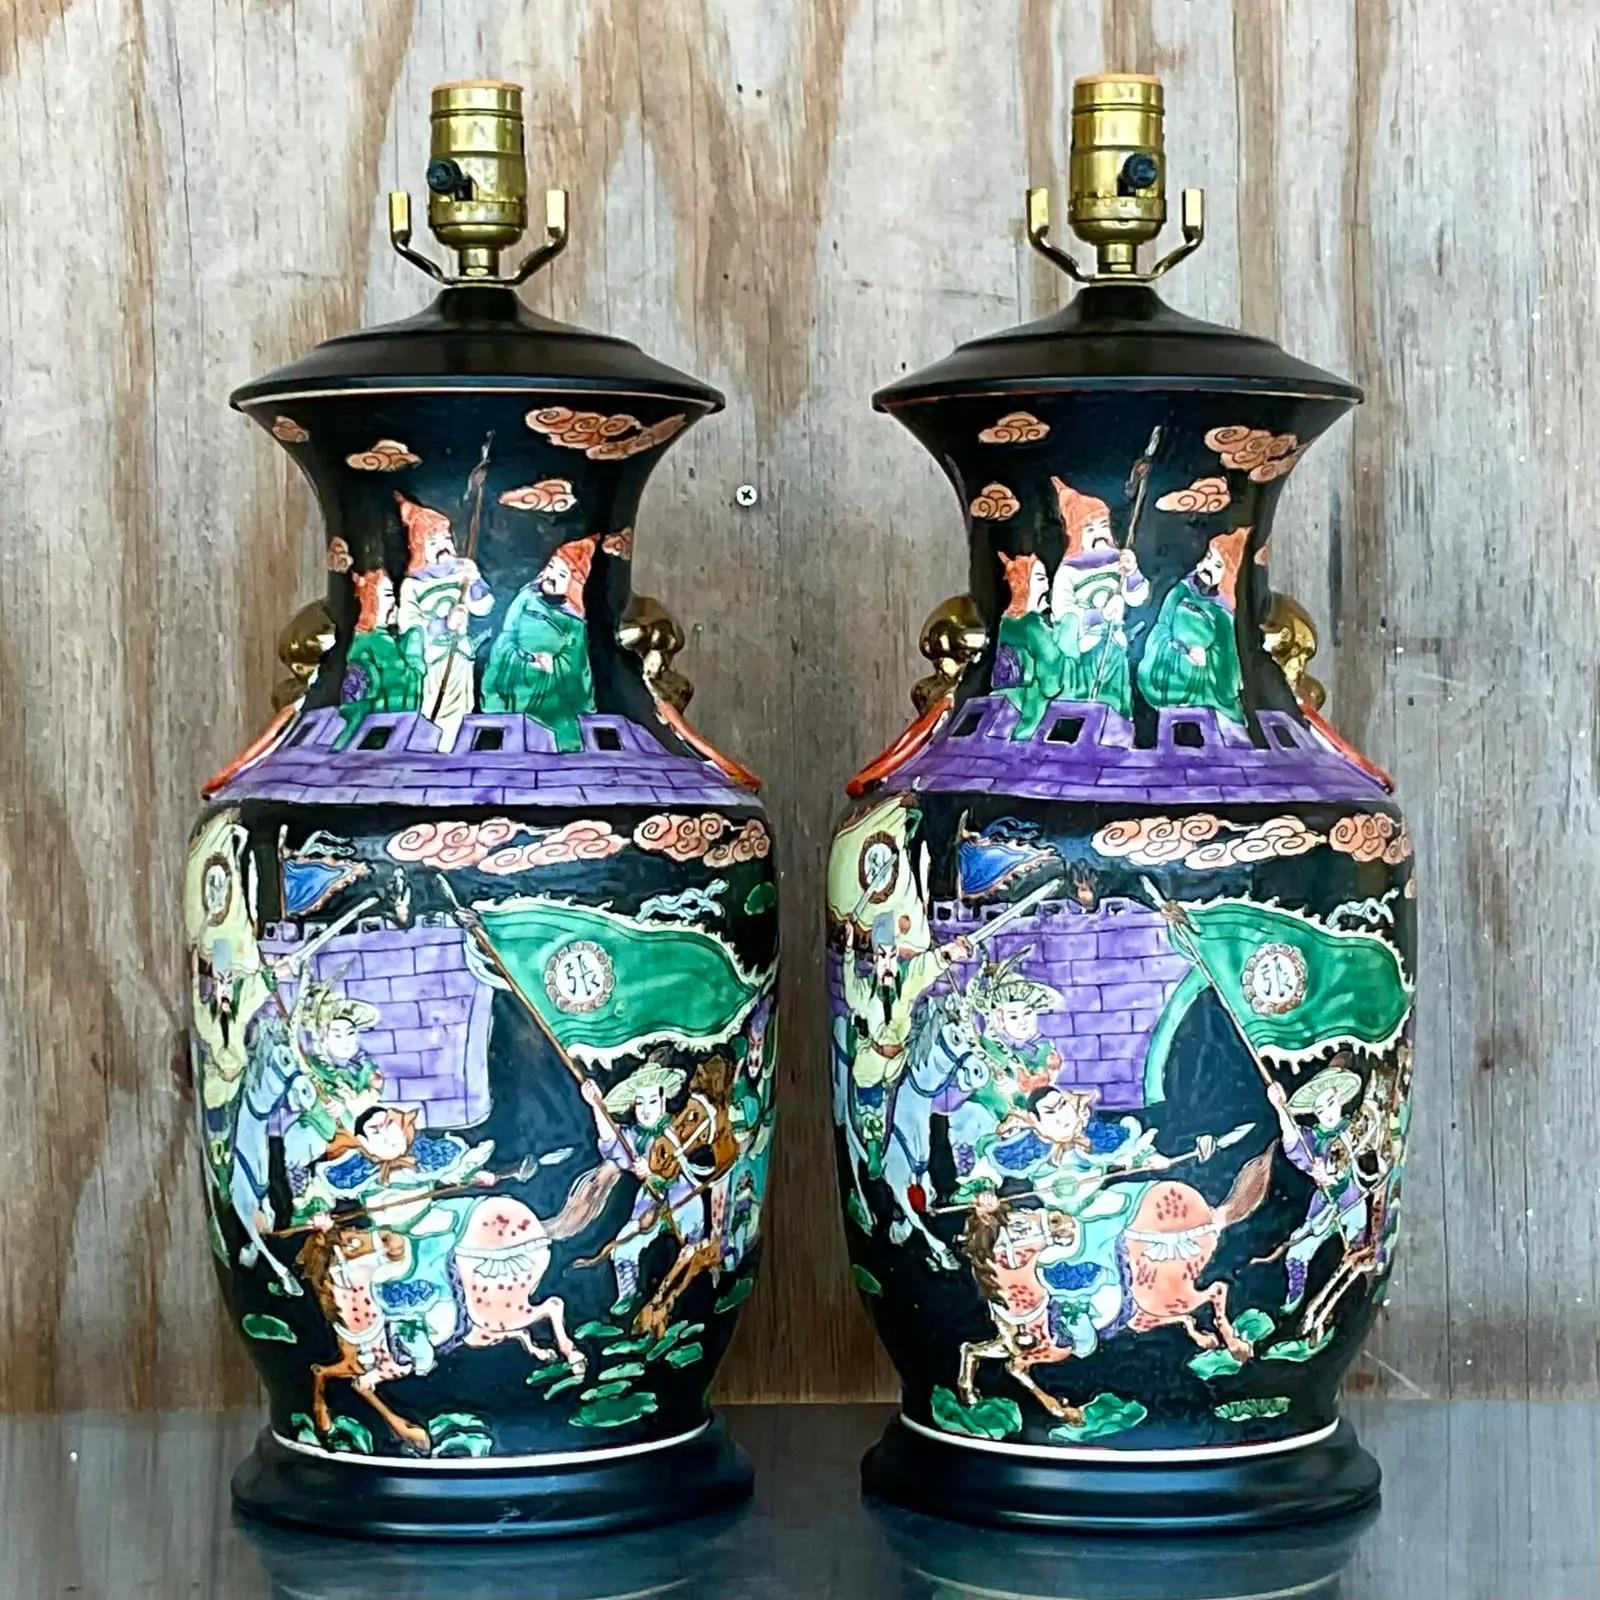 Vintage Asian Jewel Tone Chinoiserie Ceramic Lamps - a Pair For Sale 2